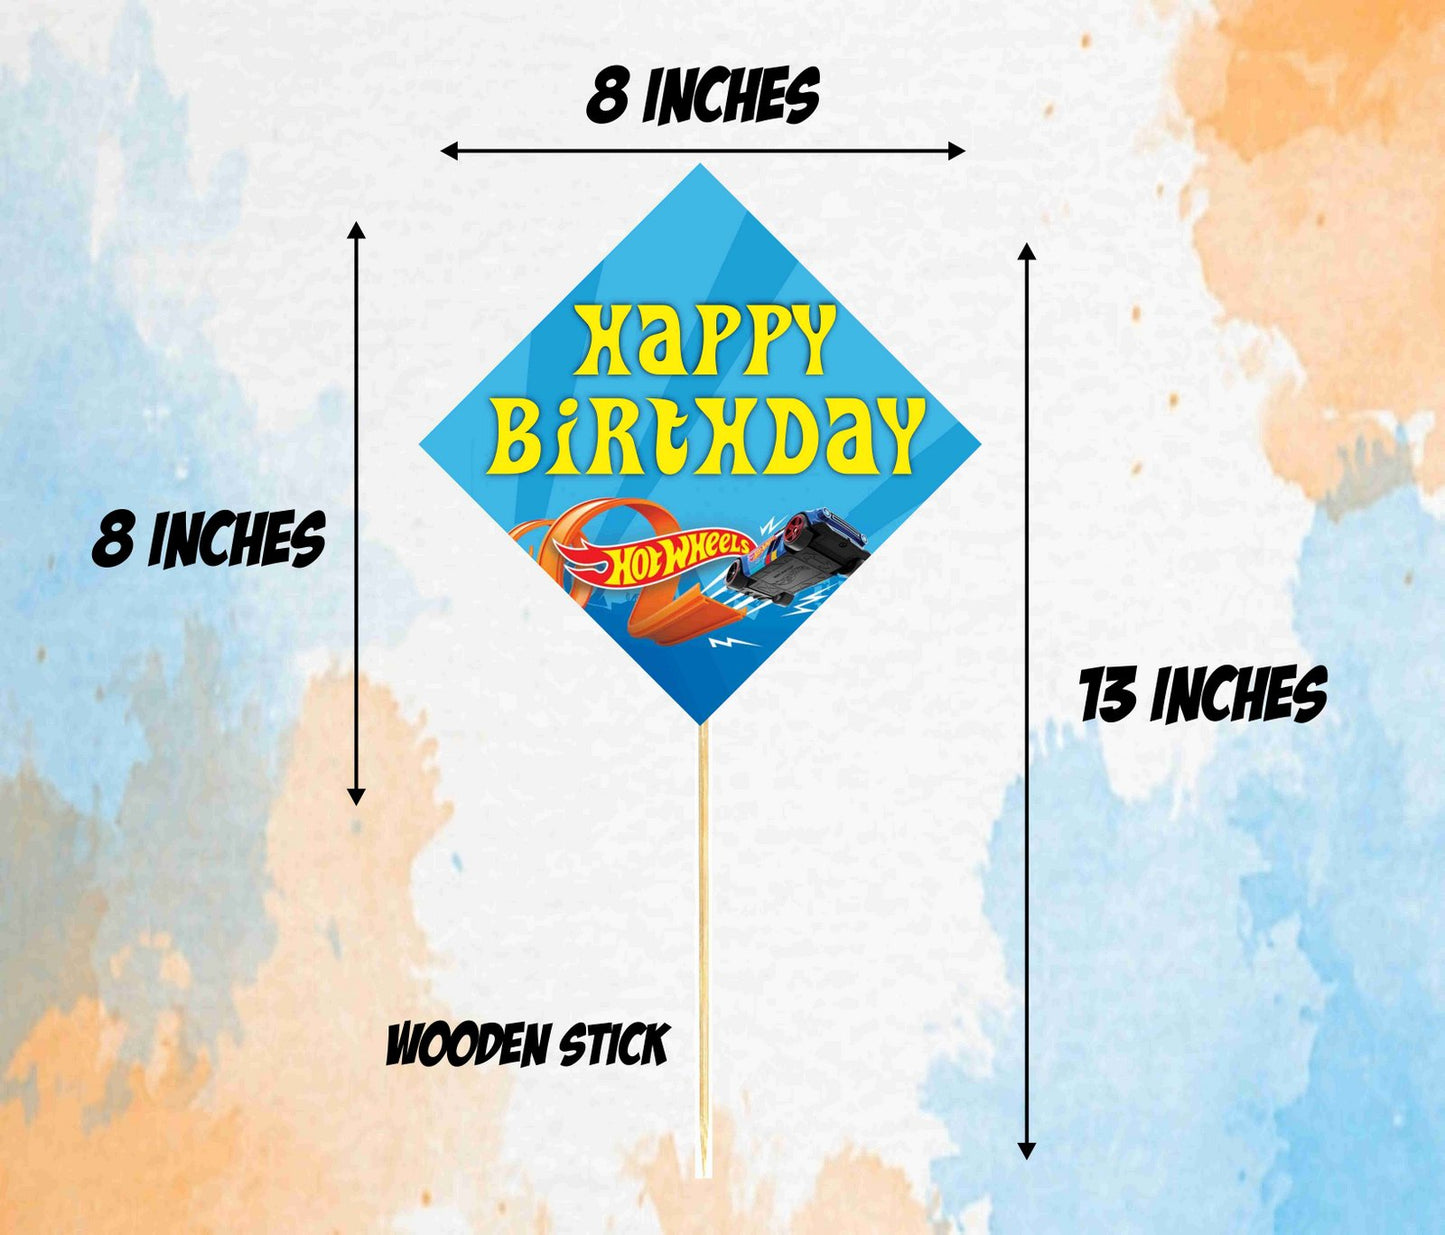 Hot Wheels Theme Birthday Photo Booth Party Props Theme Birthday Party Decoration, Birthday Photo Booth Party Item for Adults and Kids